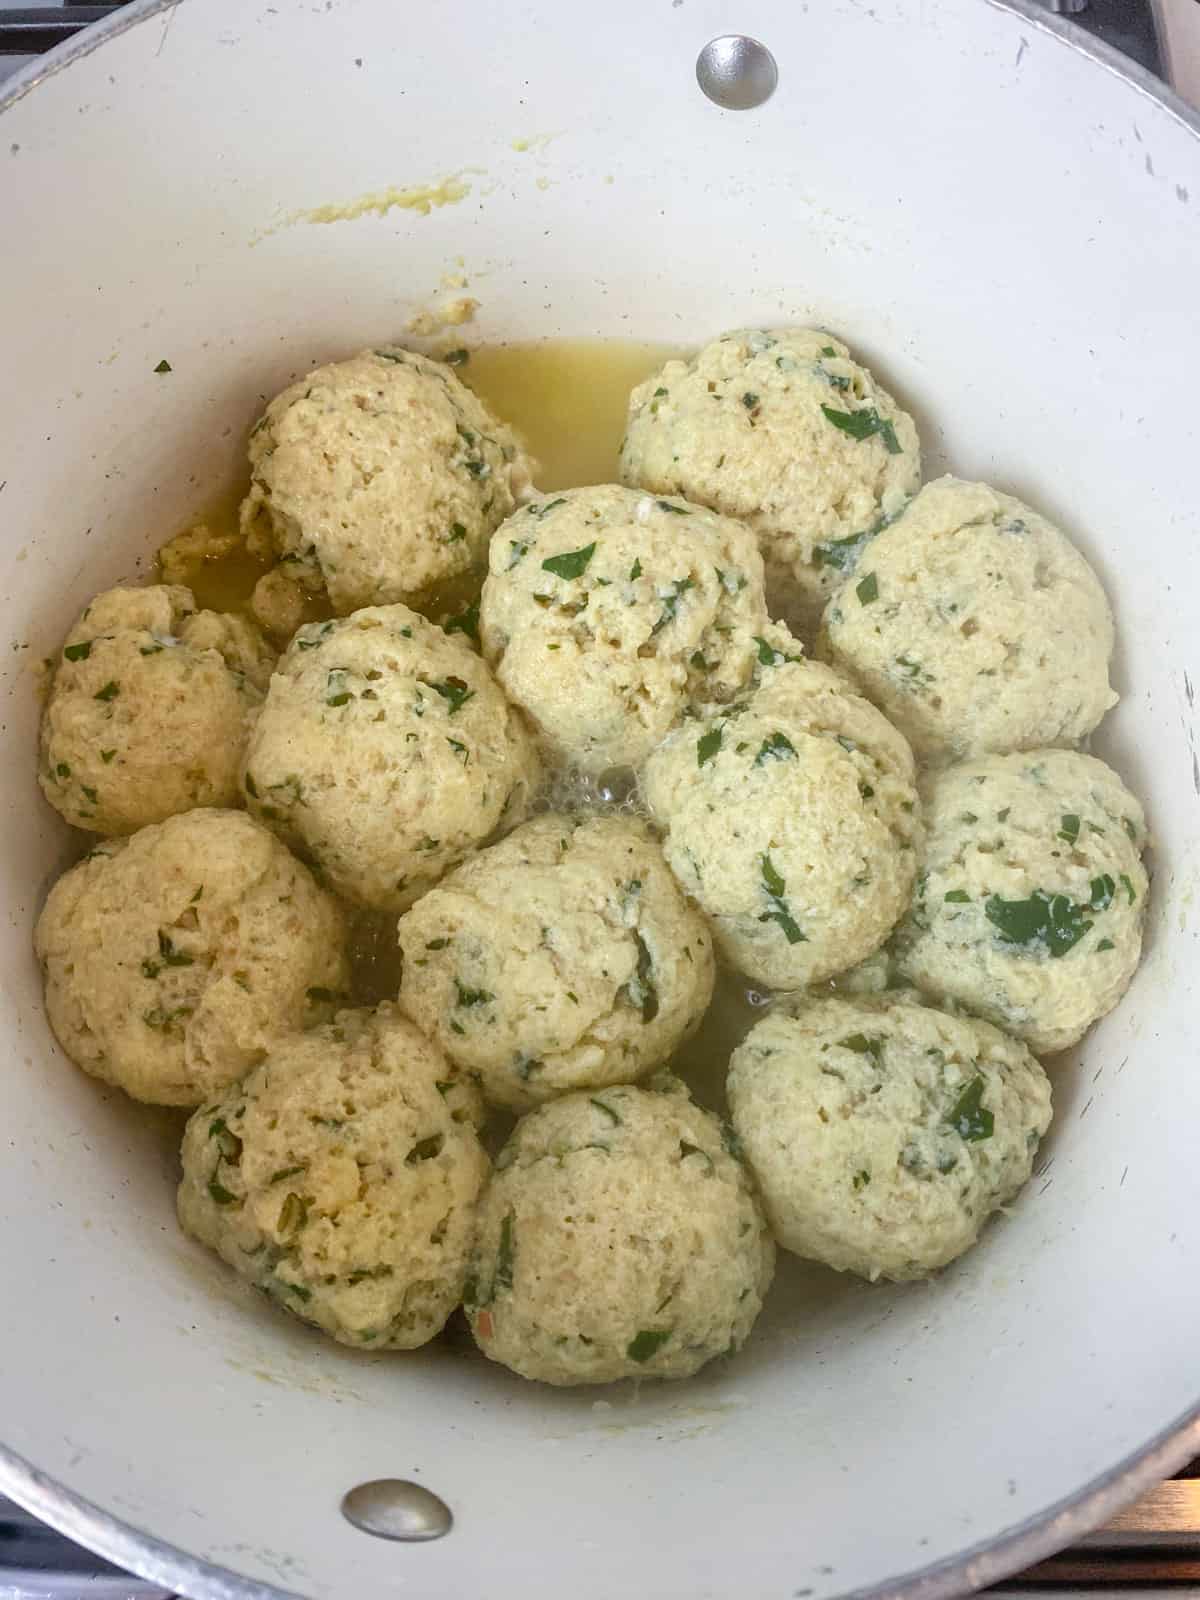 Cook the matzo balls in boiling water until plump.